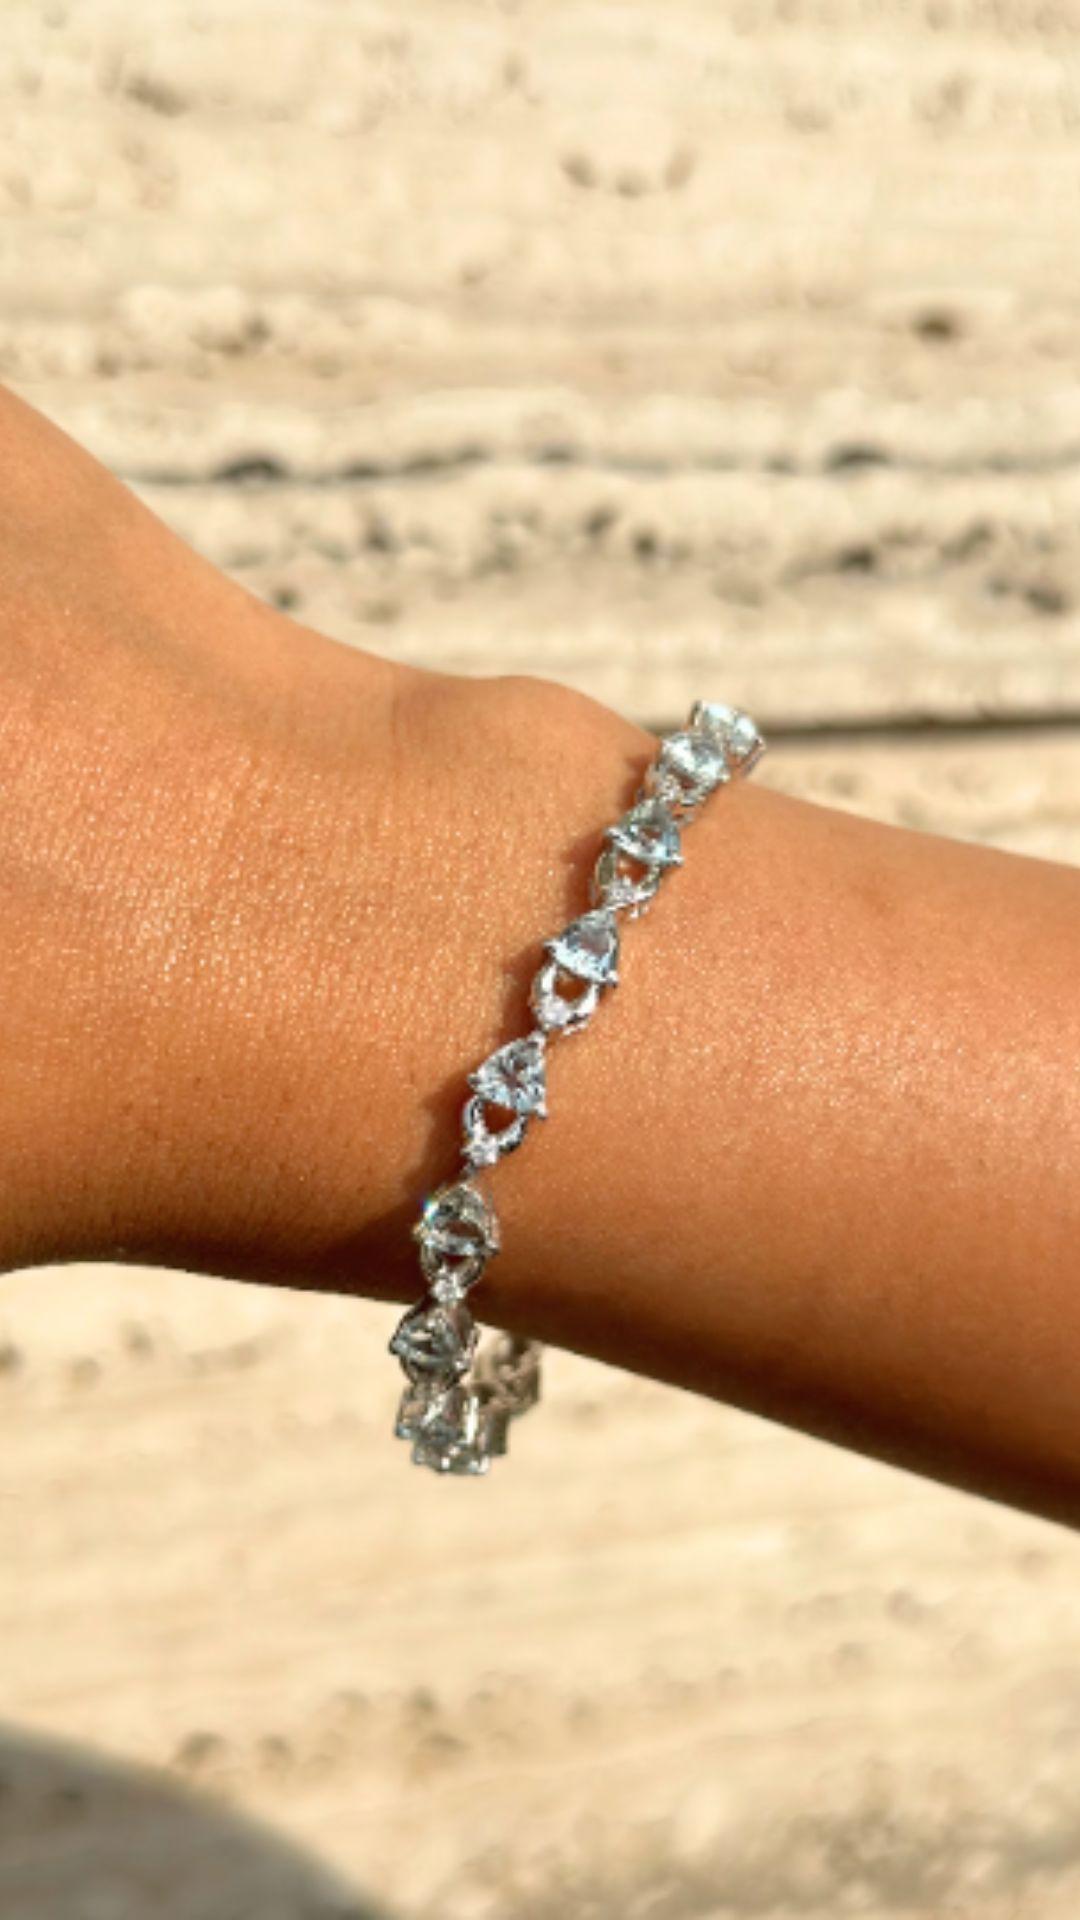 Unique Heart Cut Aquamarine Bracelet in 925 Sterling Silver Handmade Jewelry In New Condition For Sale In Houston, TX